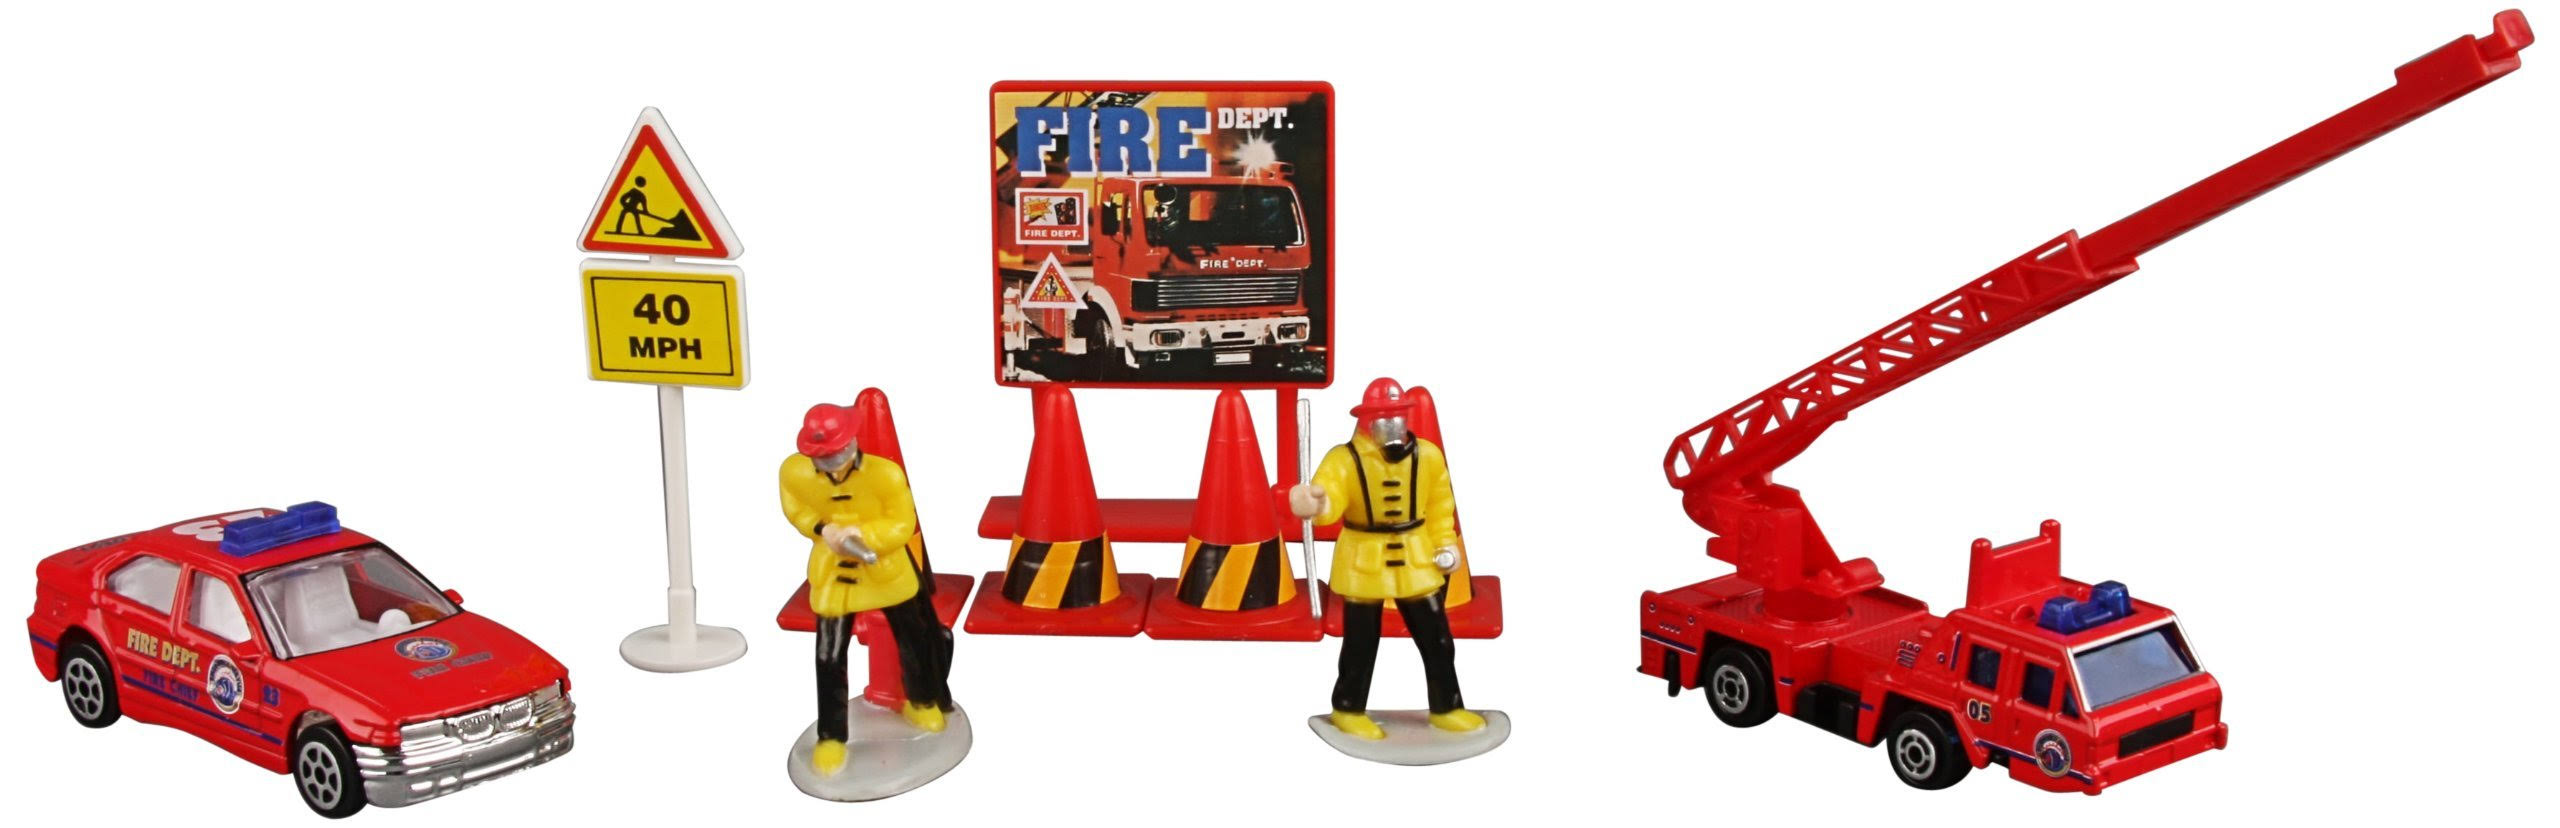 Daron Worldwide Trading Action City Fire Department - 10 Pieces